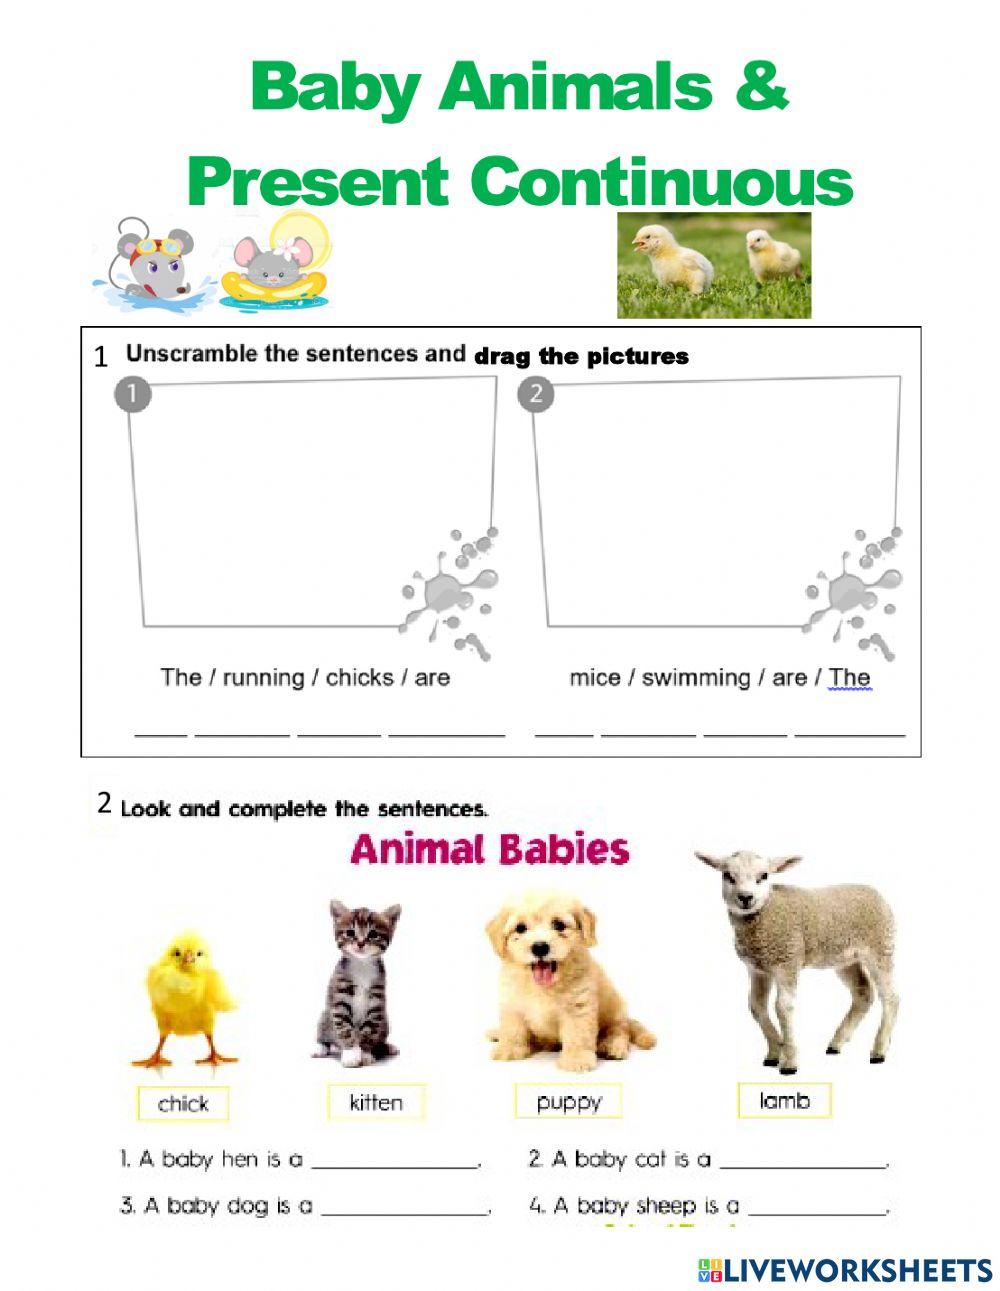 Baby Animals & Present Continuous